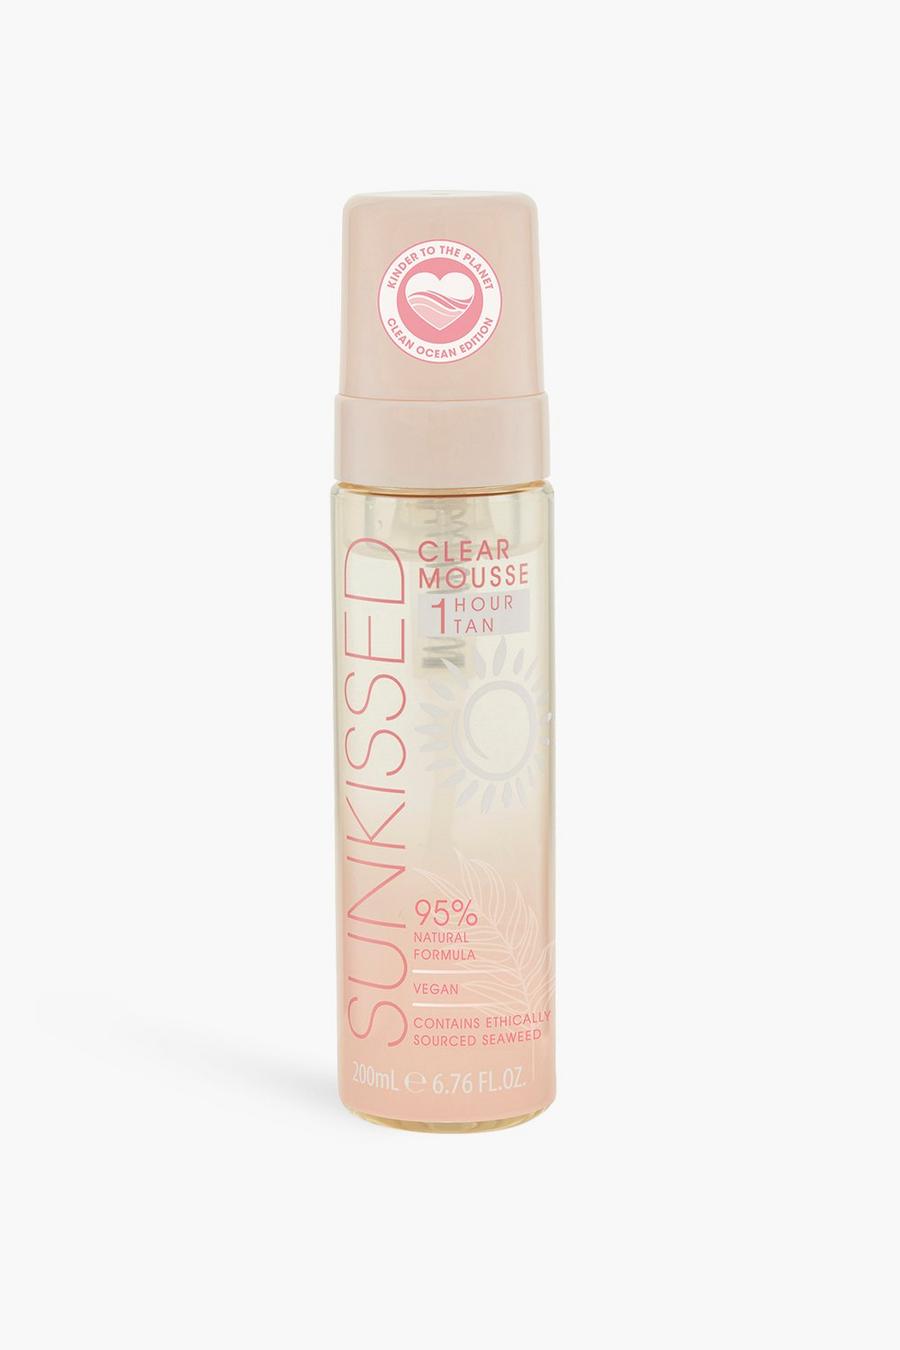 Sunkissed Vegan Clear Mousse 1 Hour Tan image number 1